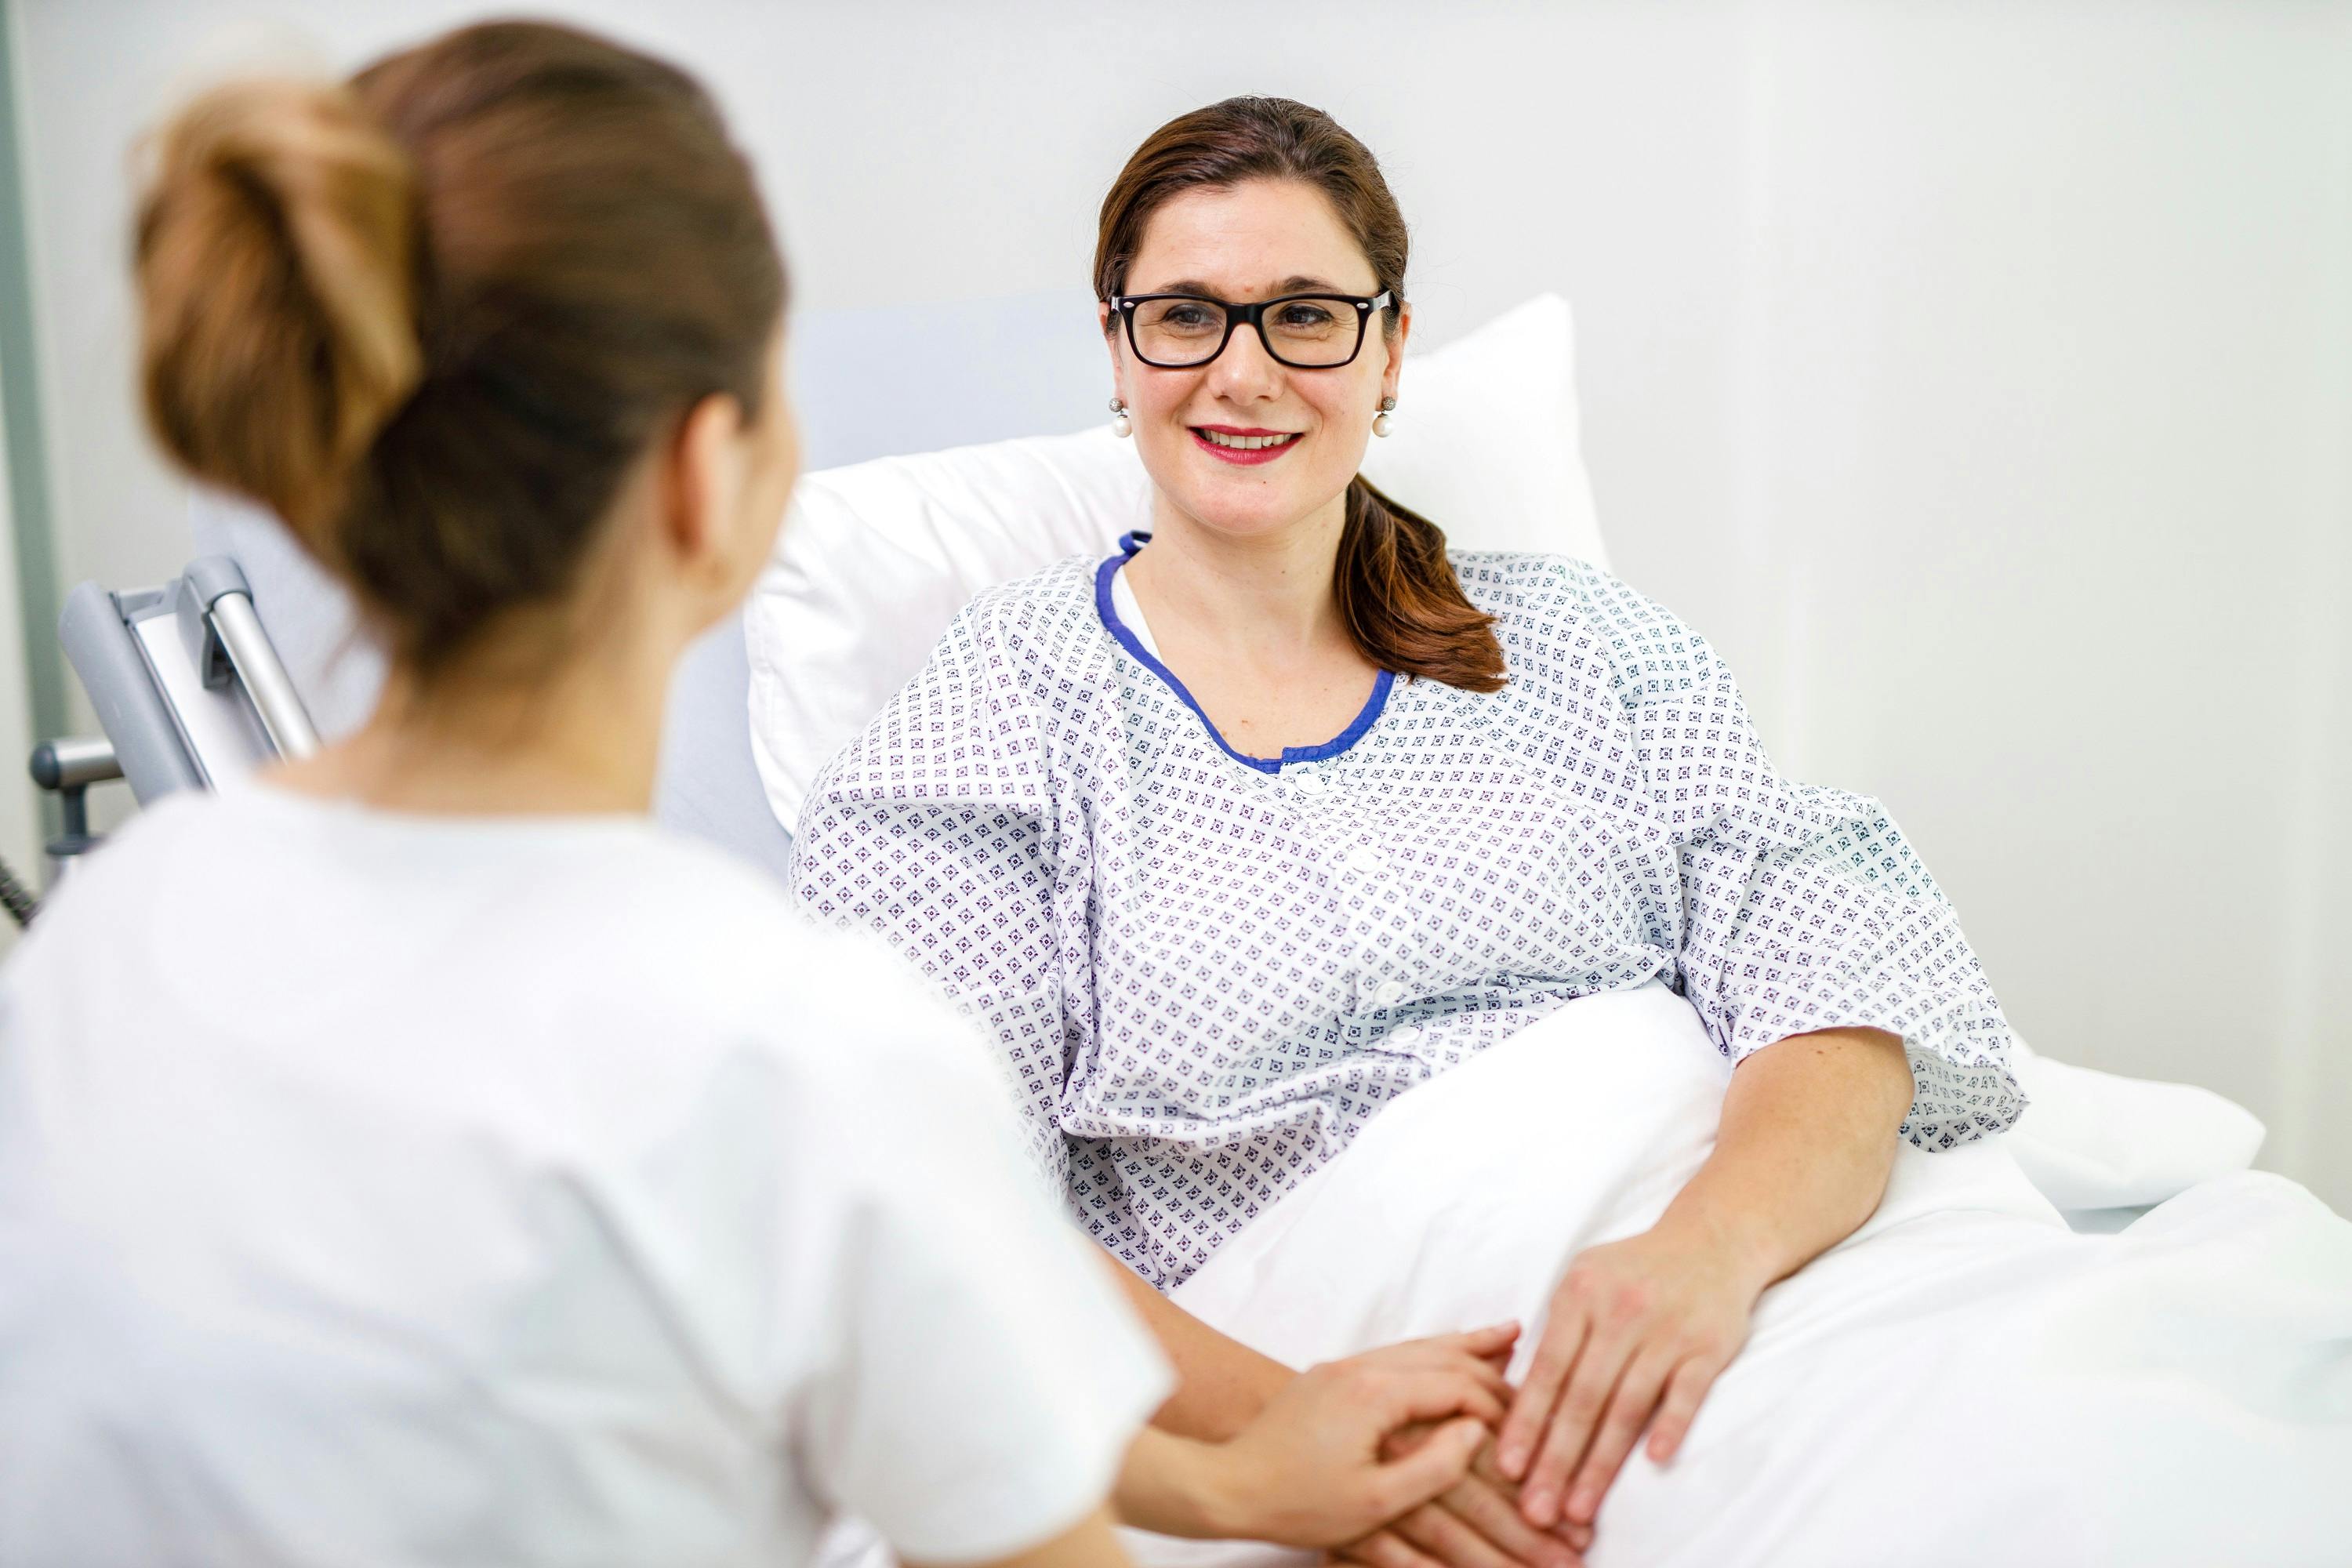 Woman in hospital gown smiles at healthcare staff.